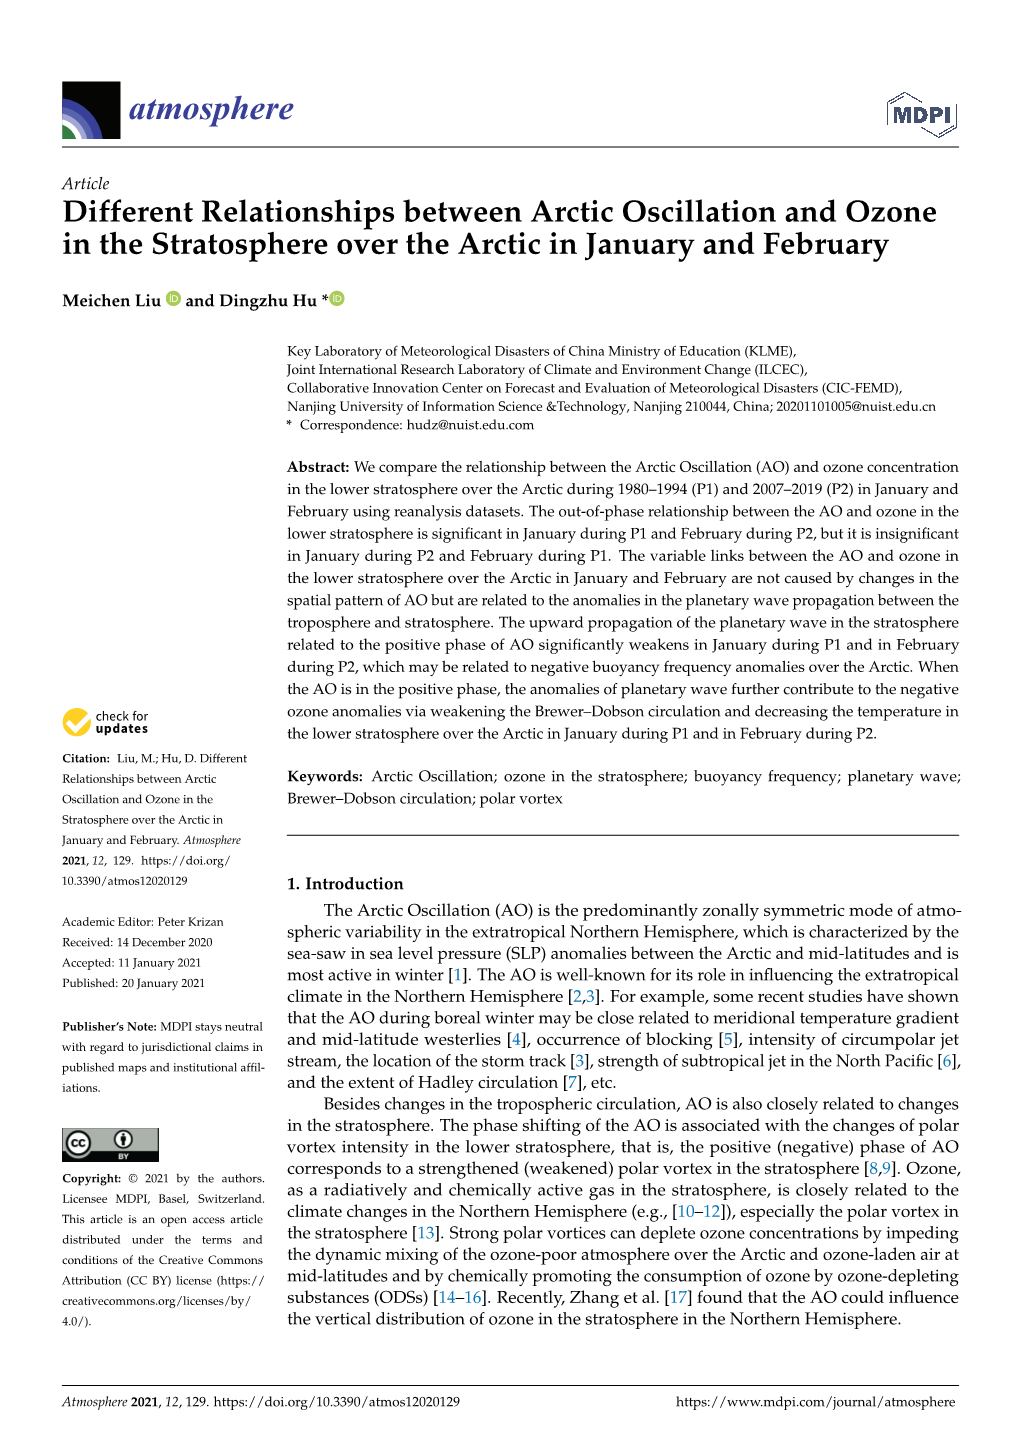 Different Relationships Between Arctic Oscillation and Ozone in the Stratosphere Over the Arctic in January and February